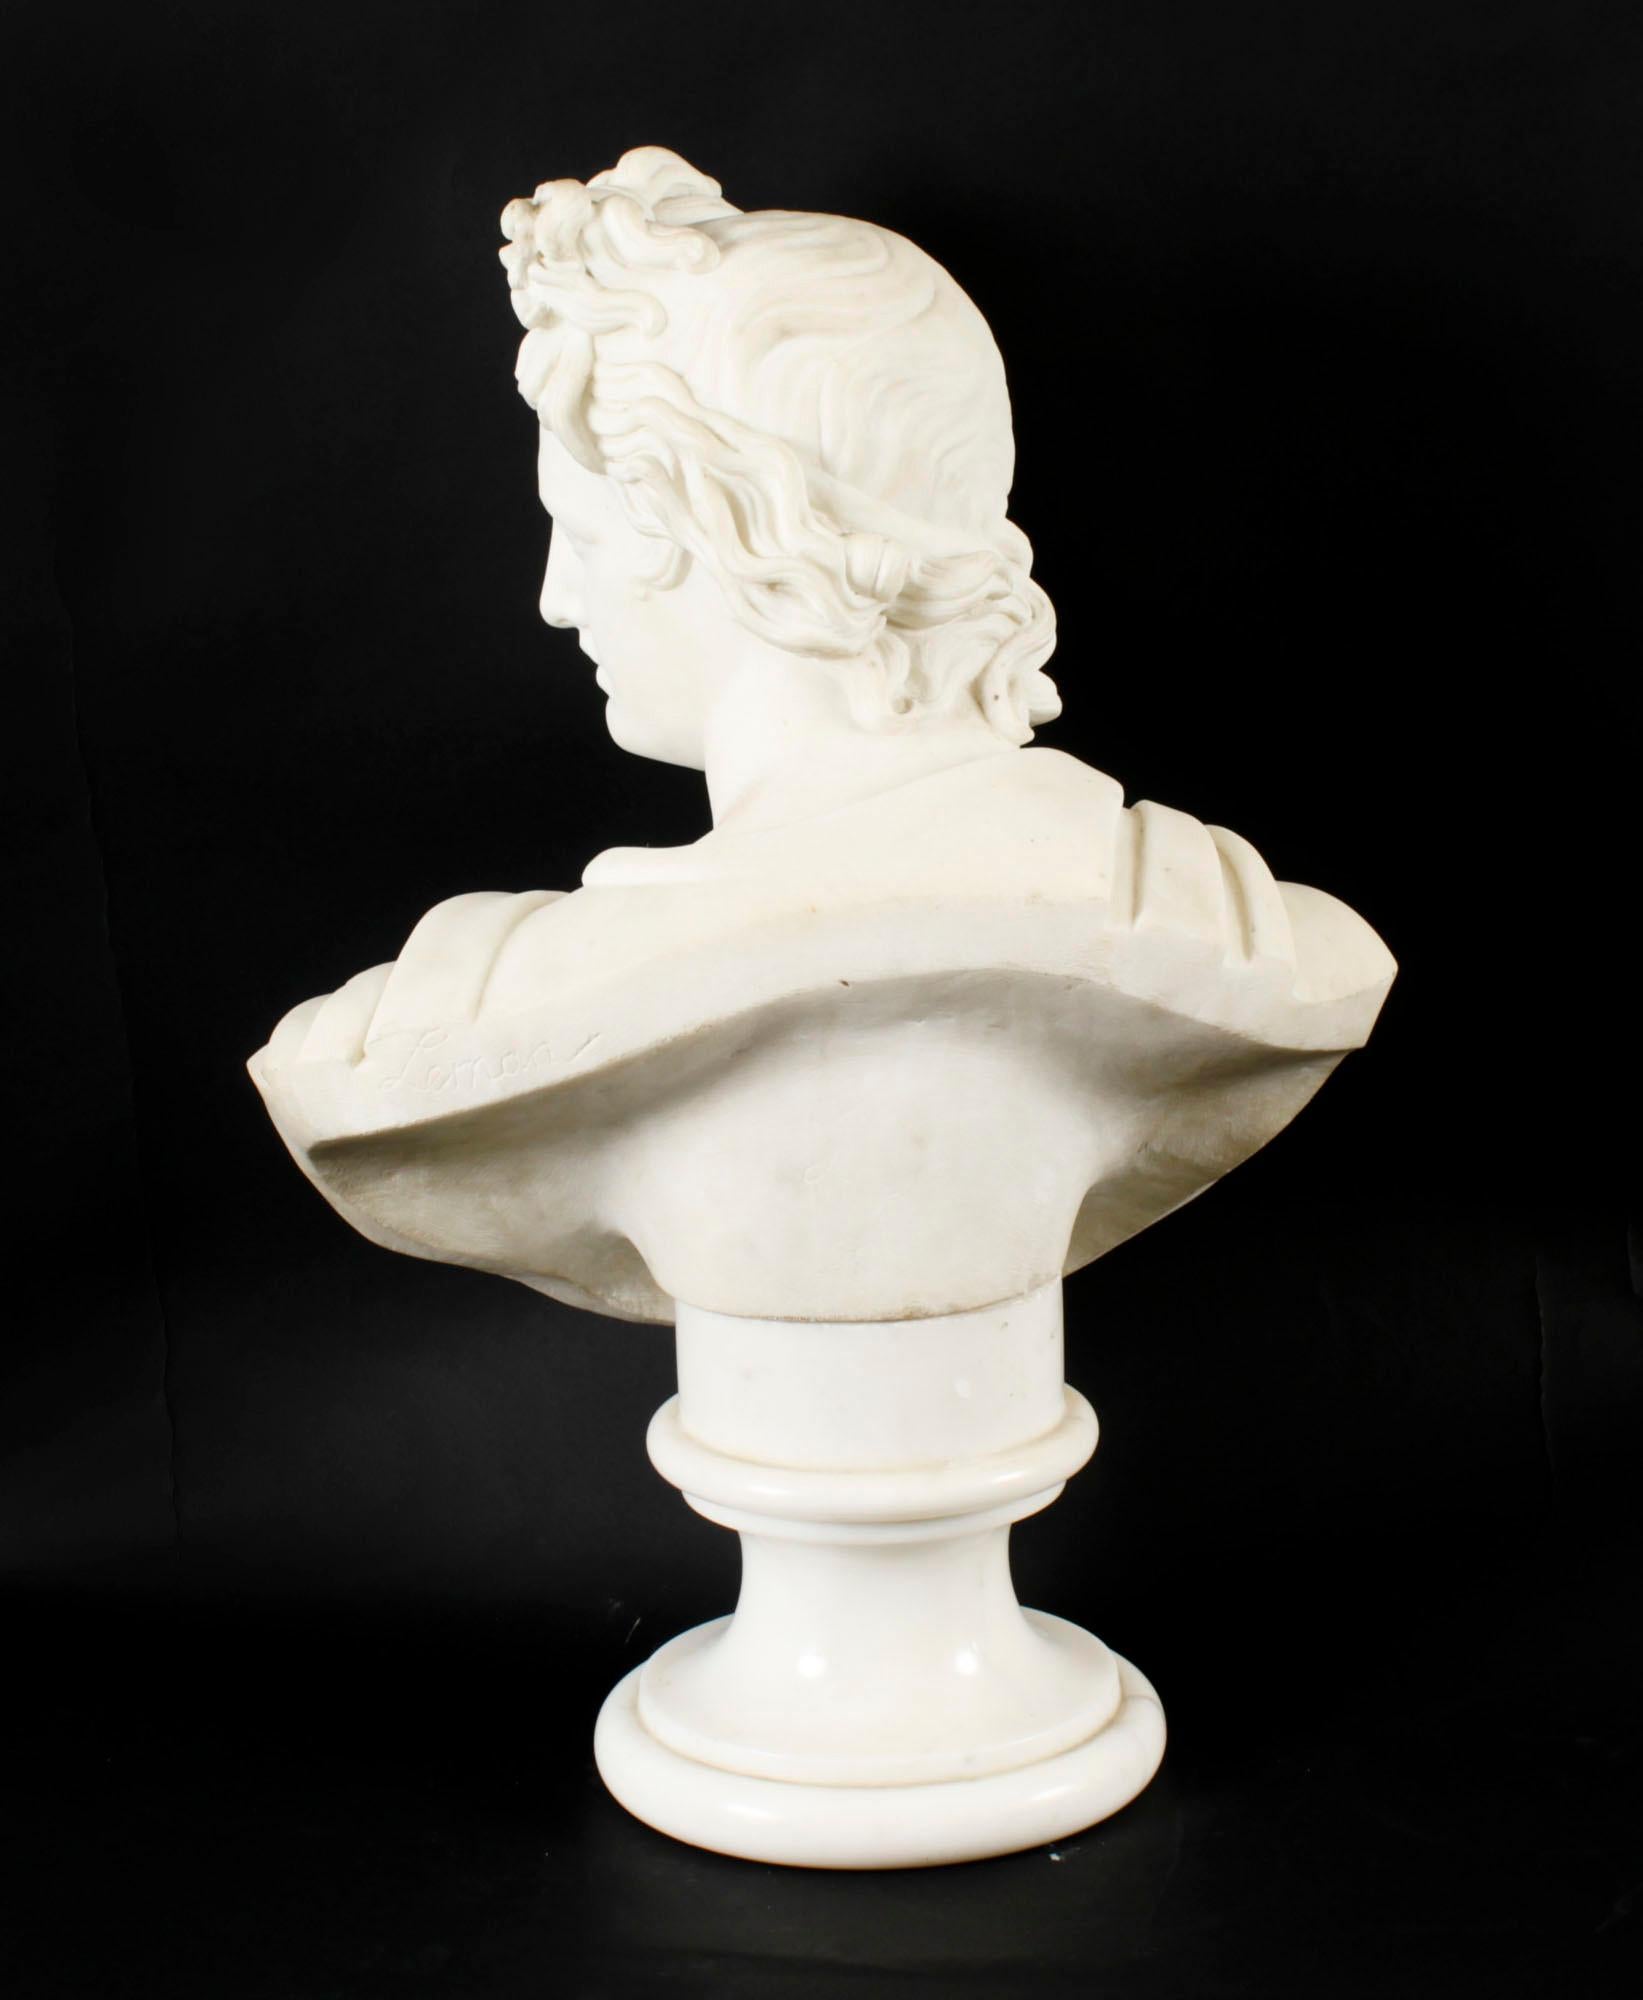 Antique Italian Marble Bust of Greek God Apollo Belvedere 19th Century For Sale 2